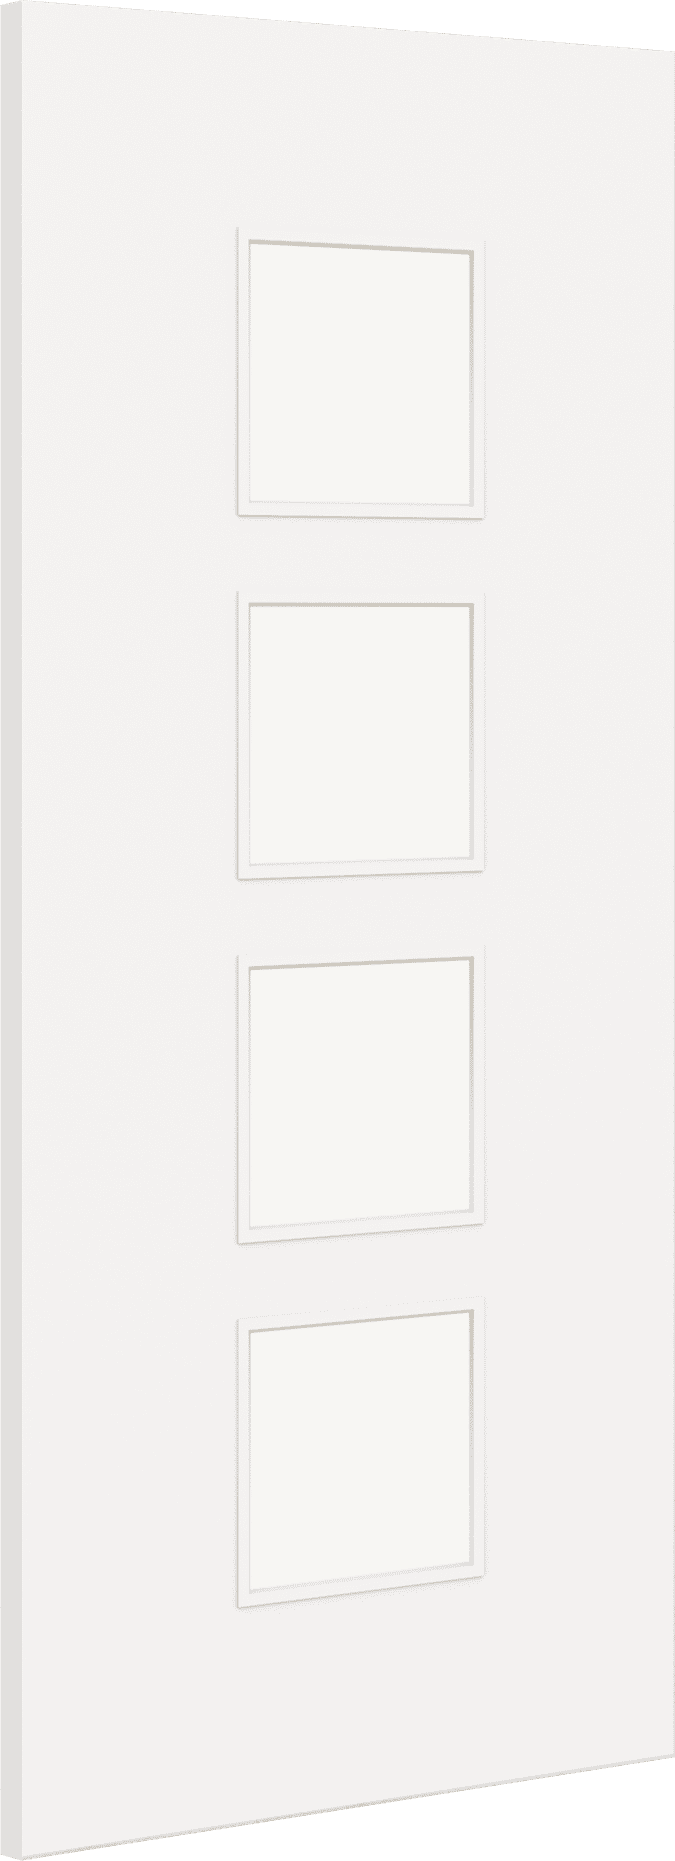 1981mm x 838mm x 44mm (33") Architectural Paint Grade White 09 Frosted Glazed Fire Door Blank